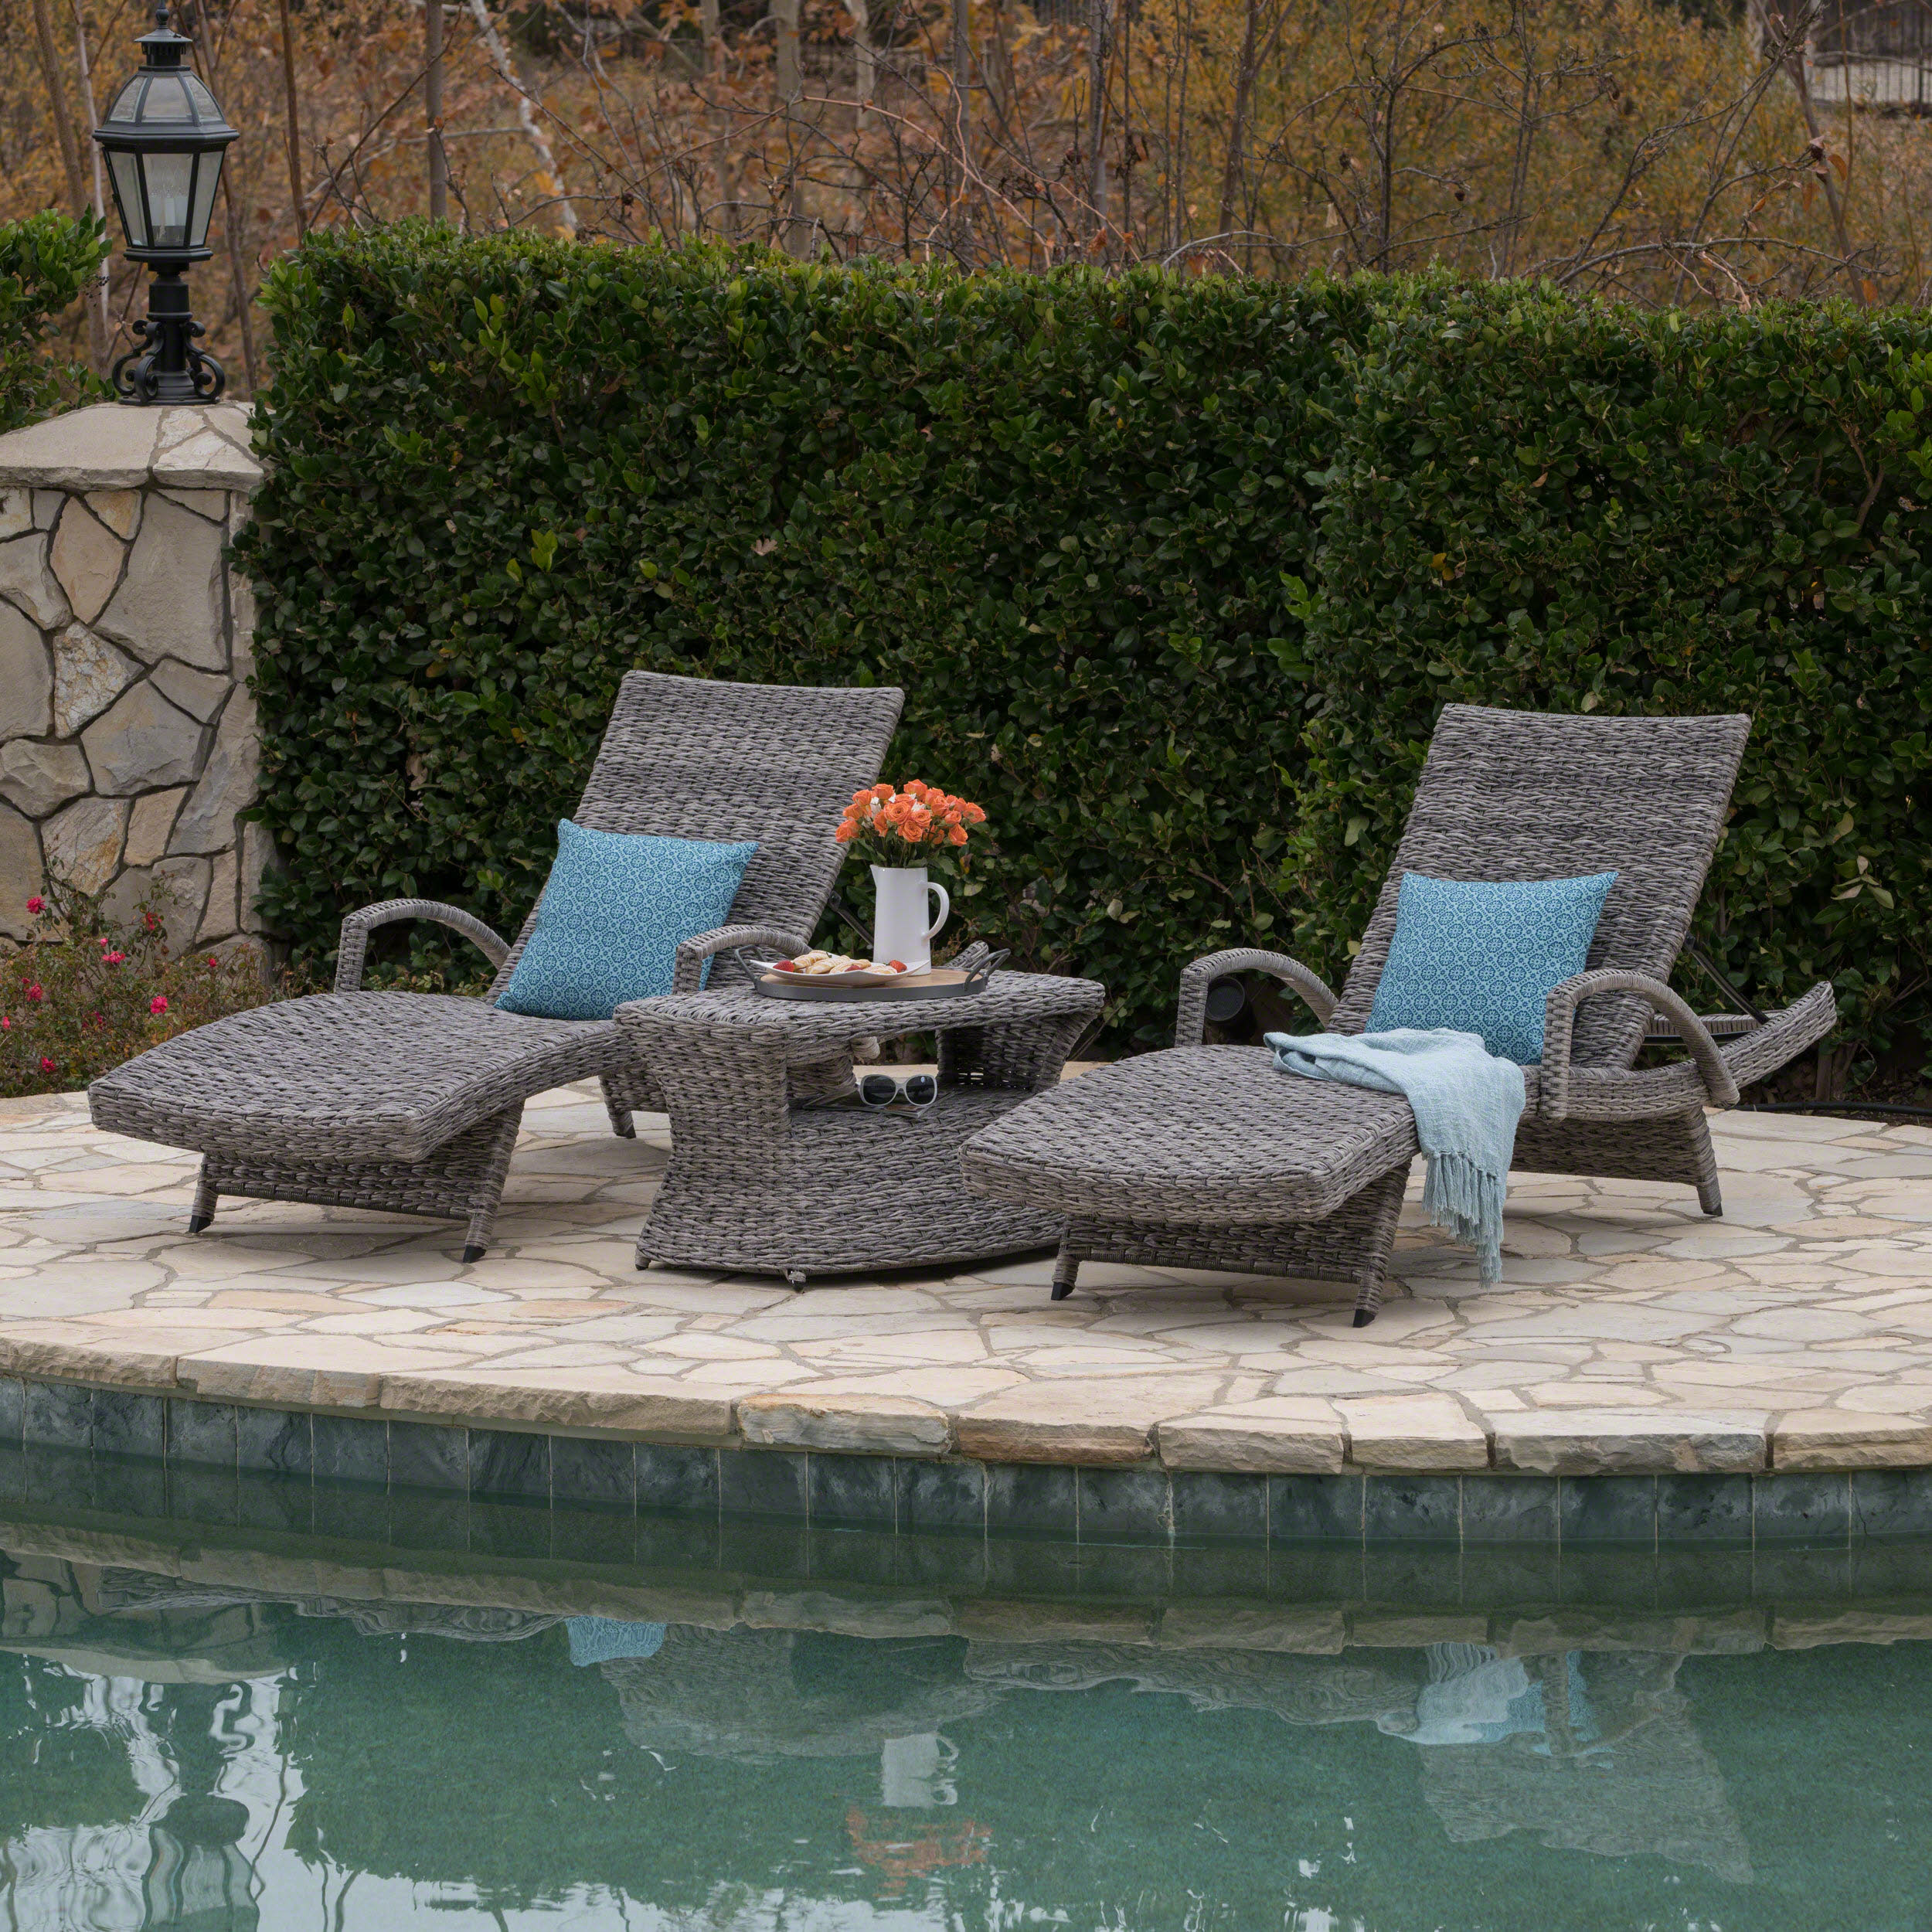 Emerald Outdoor 3 Piece Armed Wicker Chaise Lounges with Rectangular Side Table, Grey - image 1 of 6